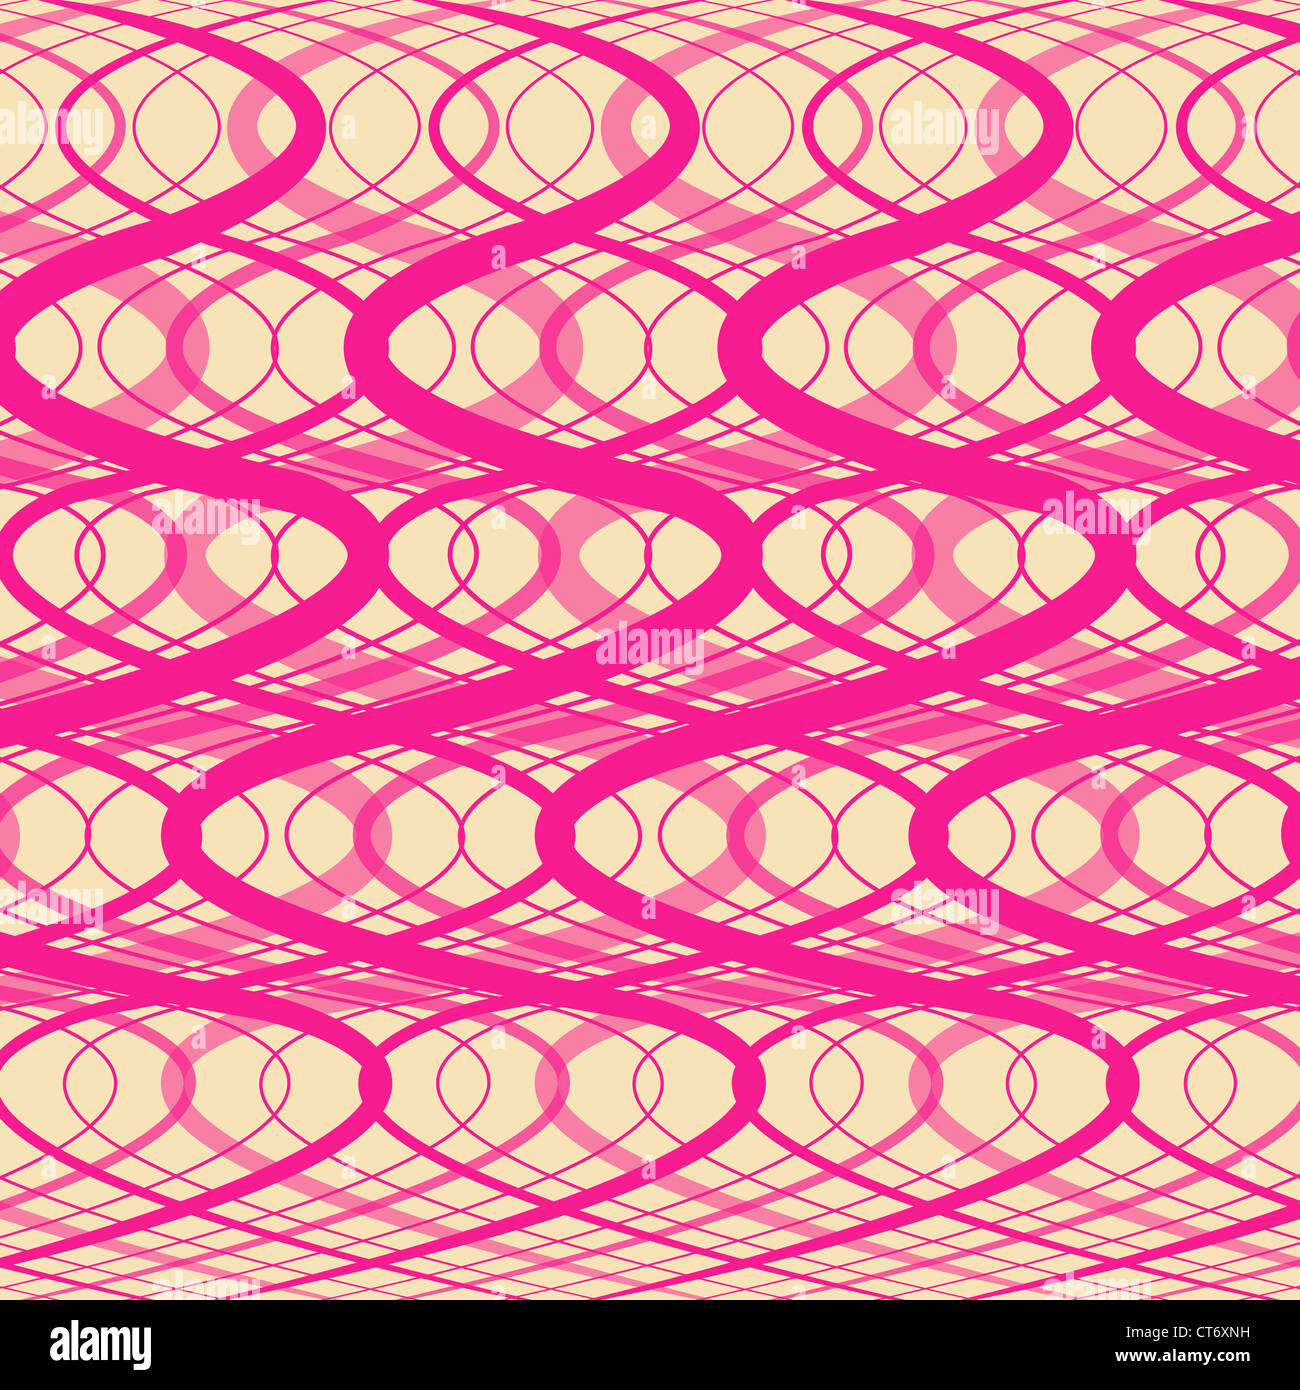 Pink background - abstraction with twisting strips Stock Photo